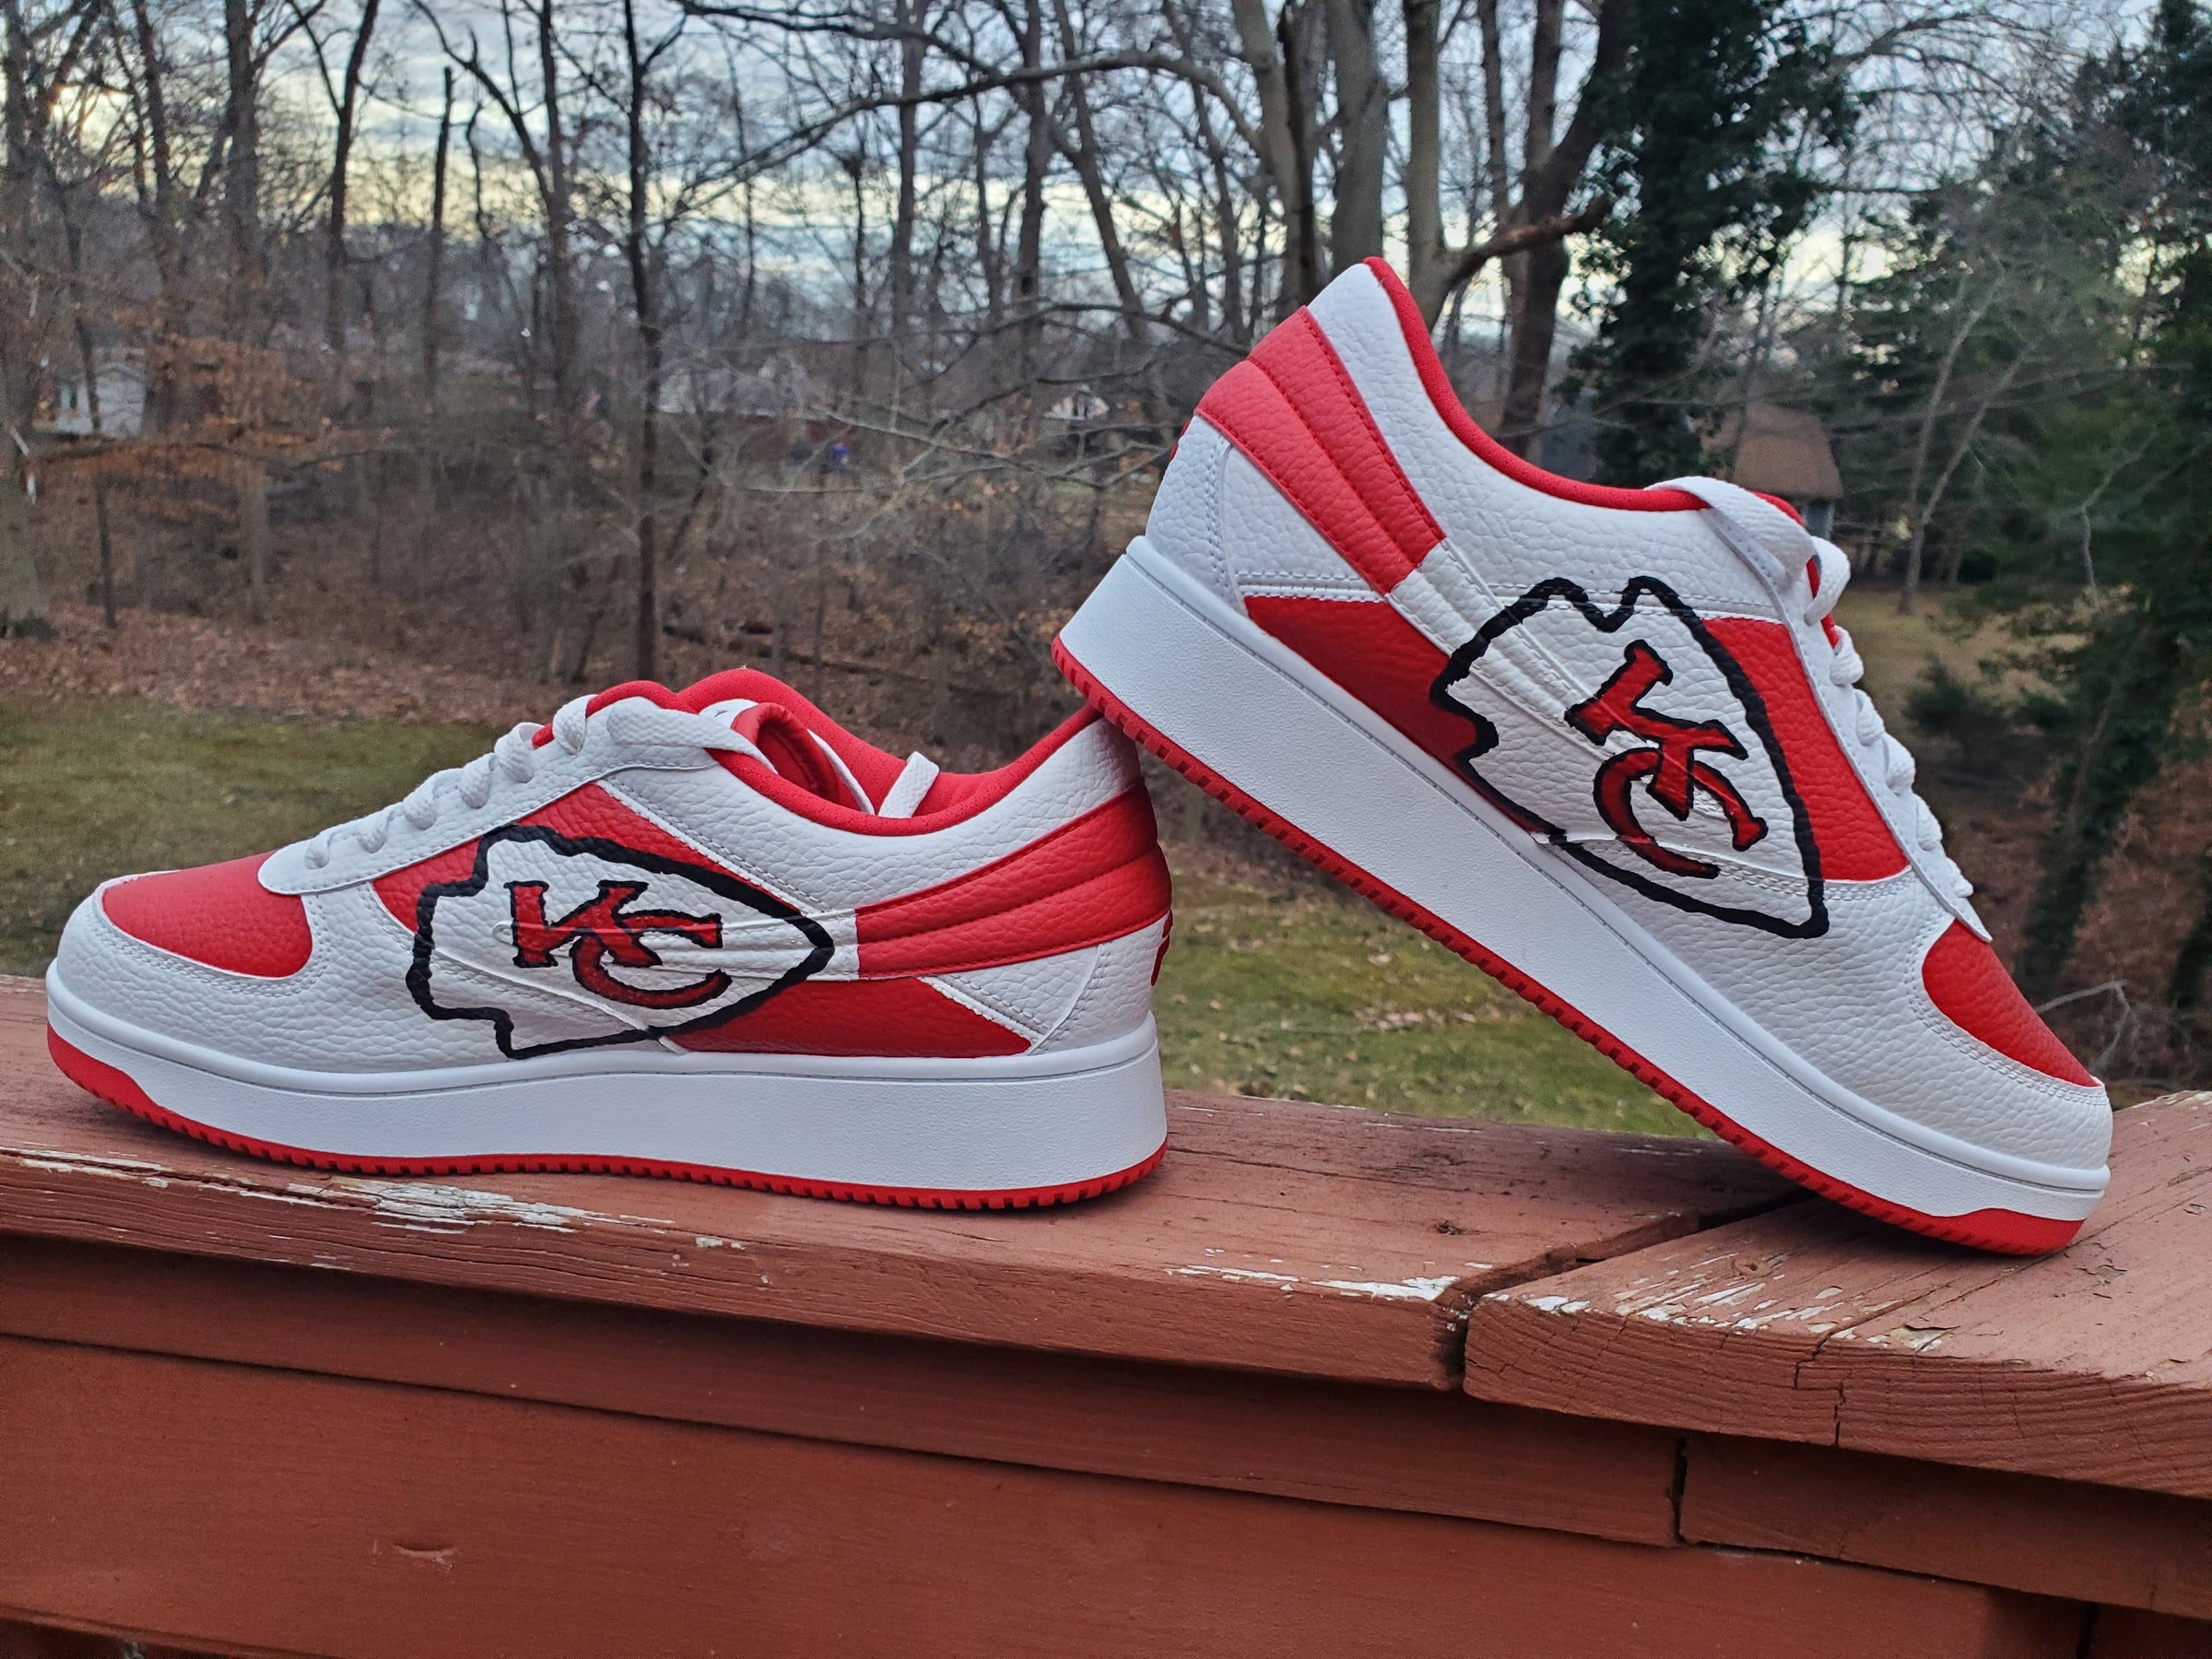 Customized and Restored Sneakers